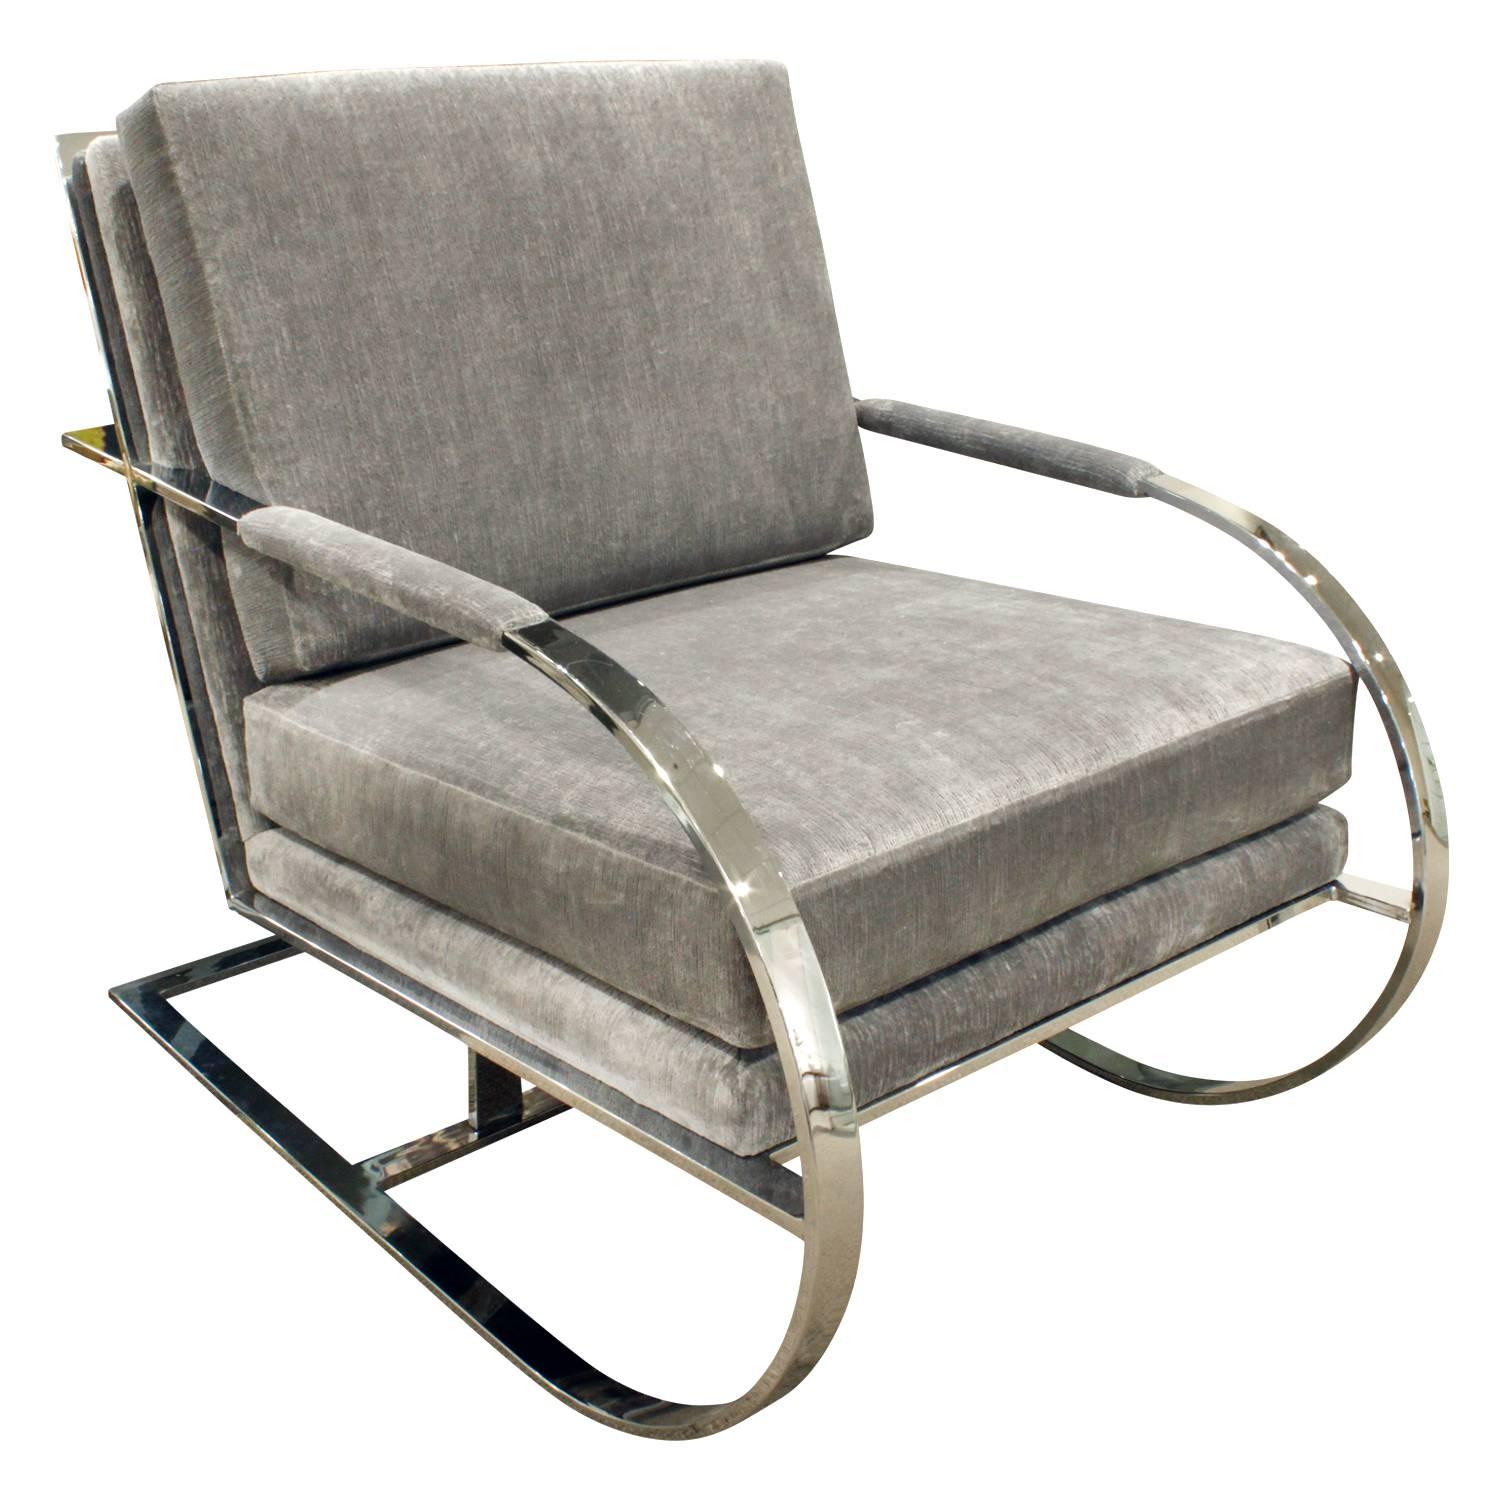 Milo Baughman Cantilevered Lounge Chair, 1970s